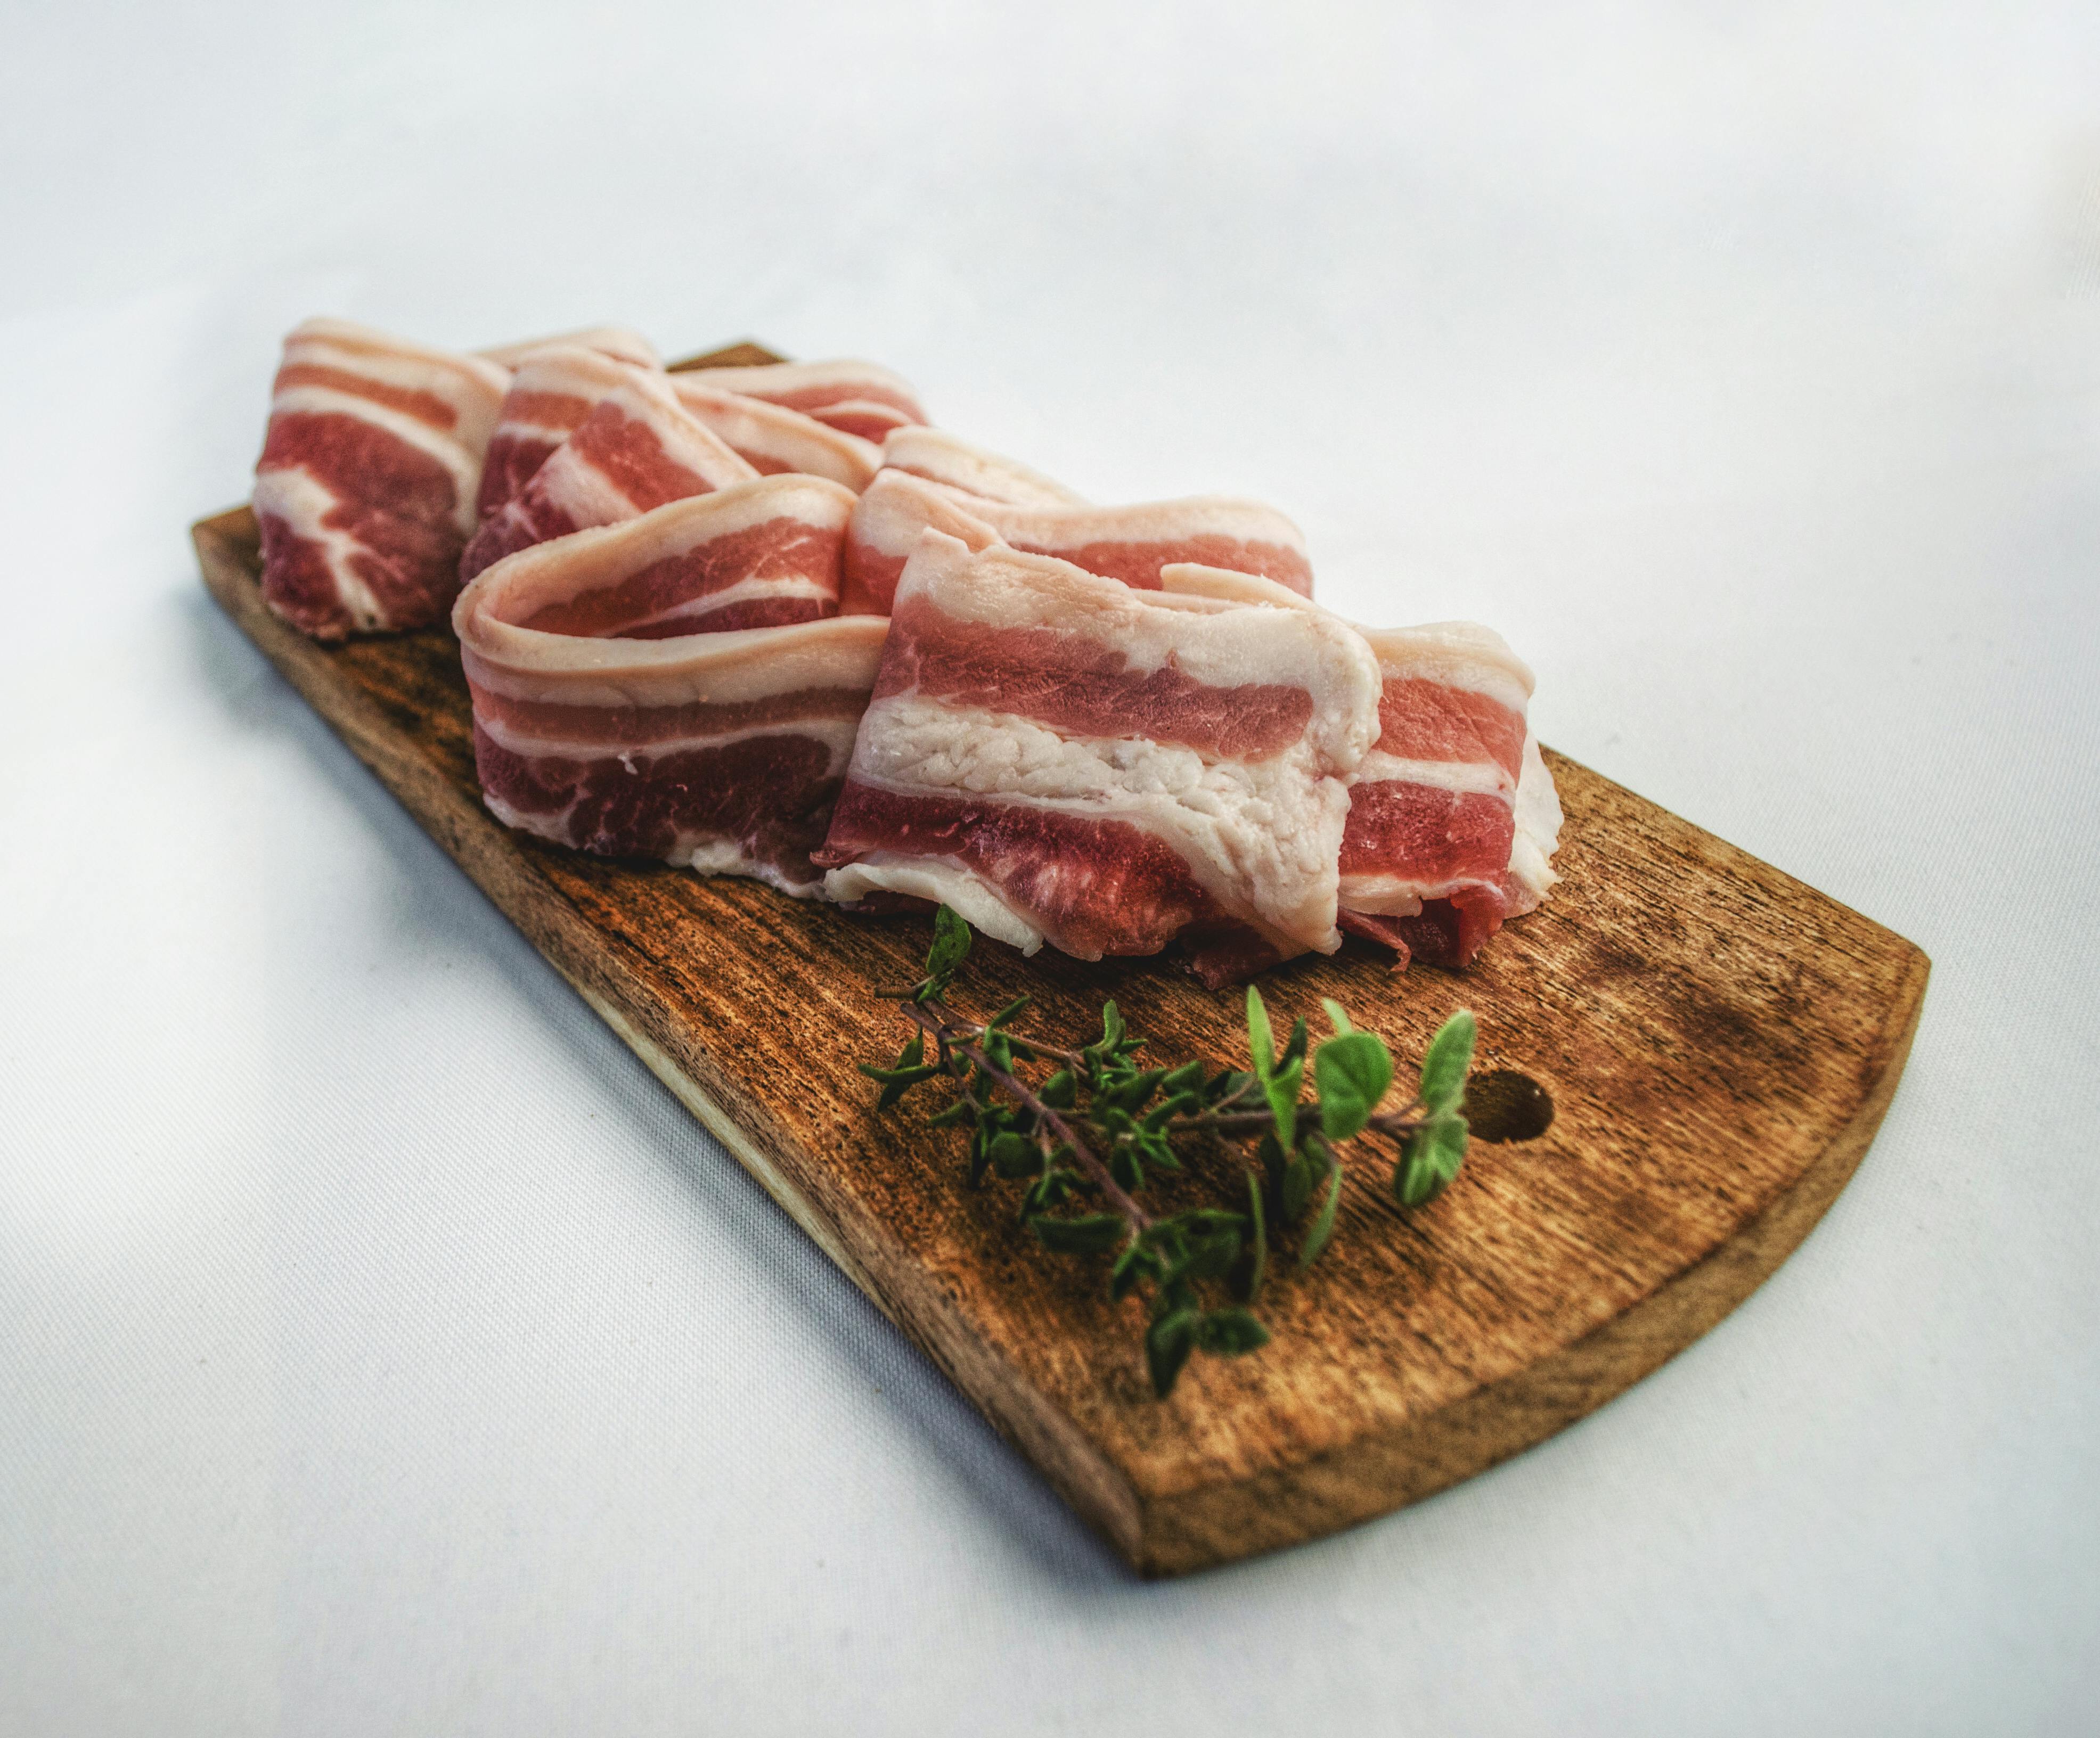 Sliced bacon on top of a brown chopping board. | Source: Pexels